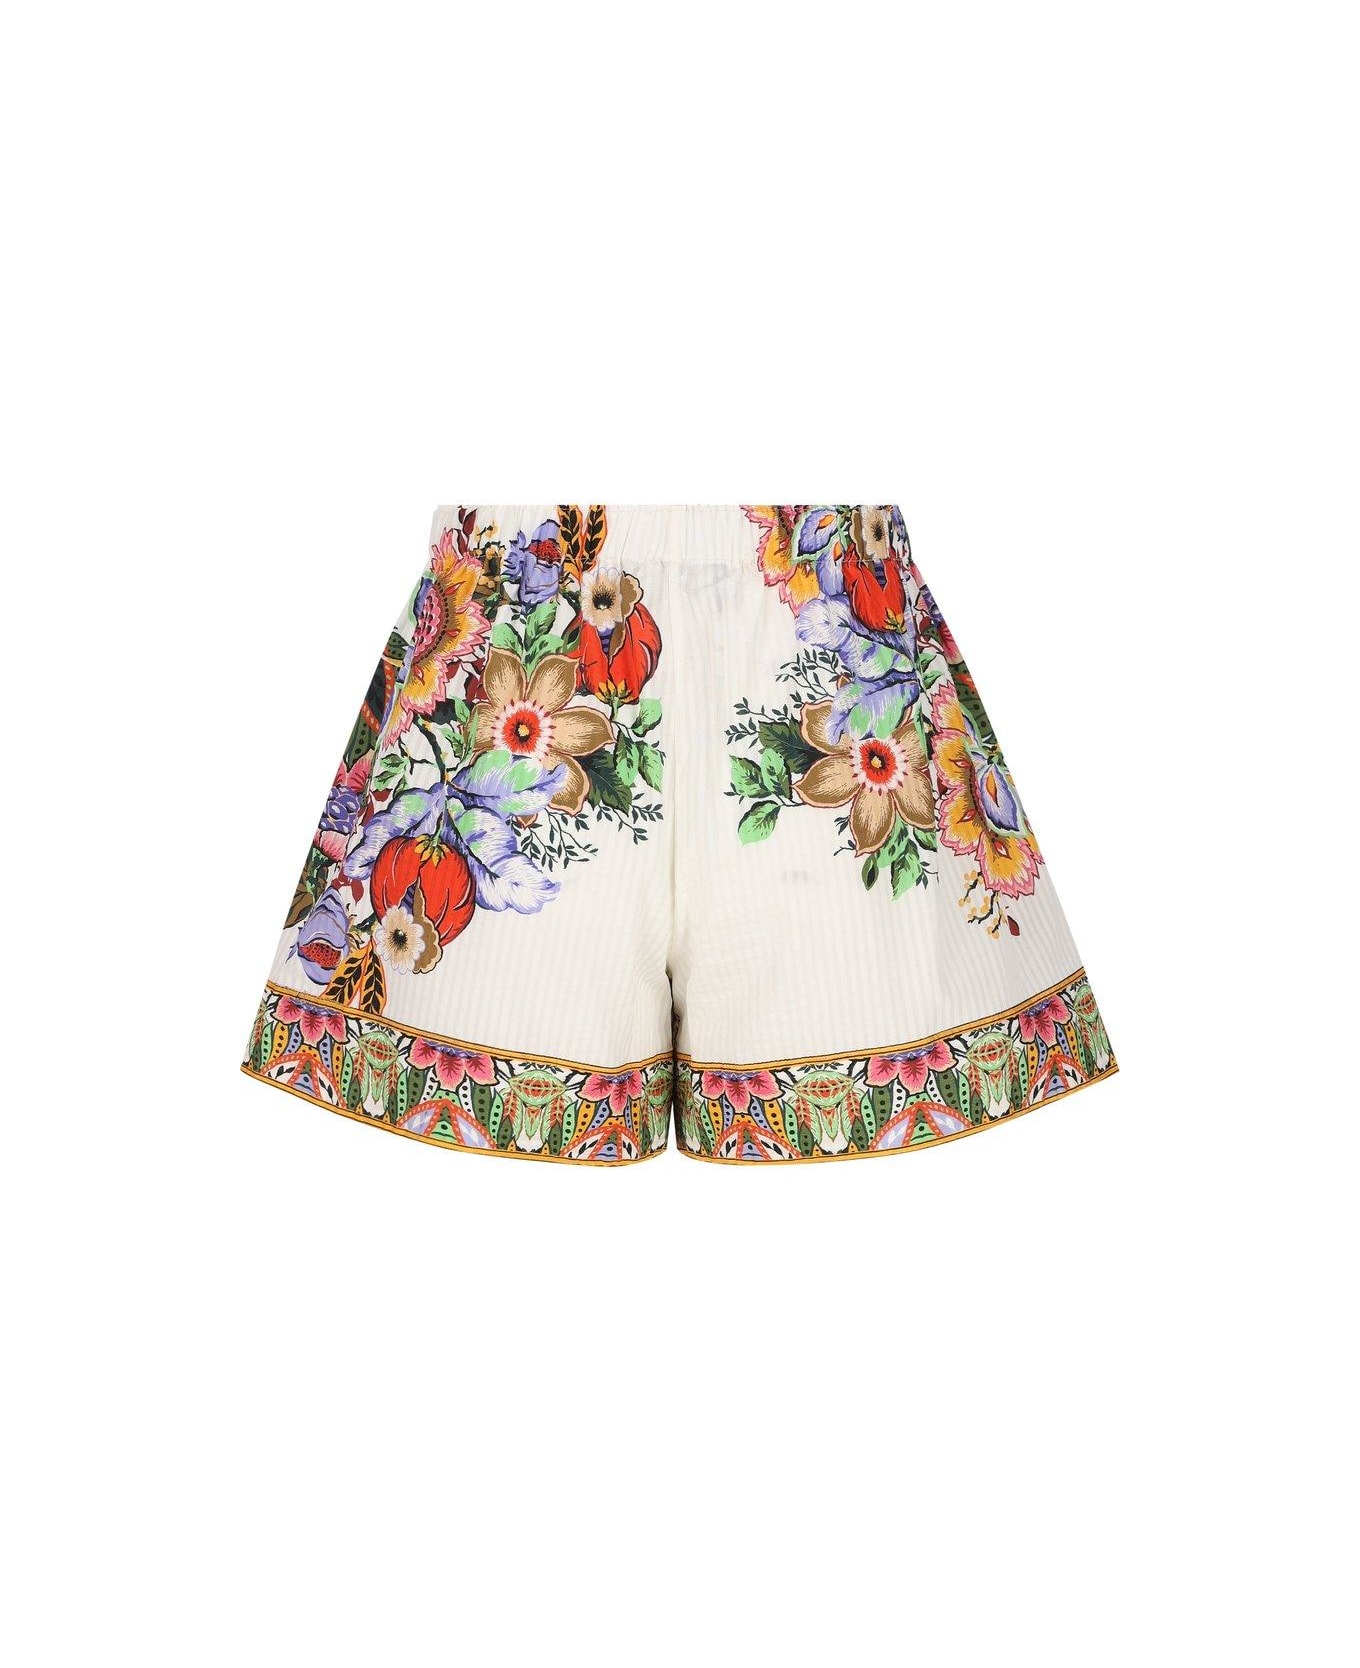 Etro Floral Printed Elasticated Waist Shorts